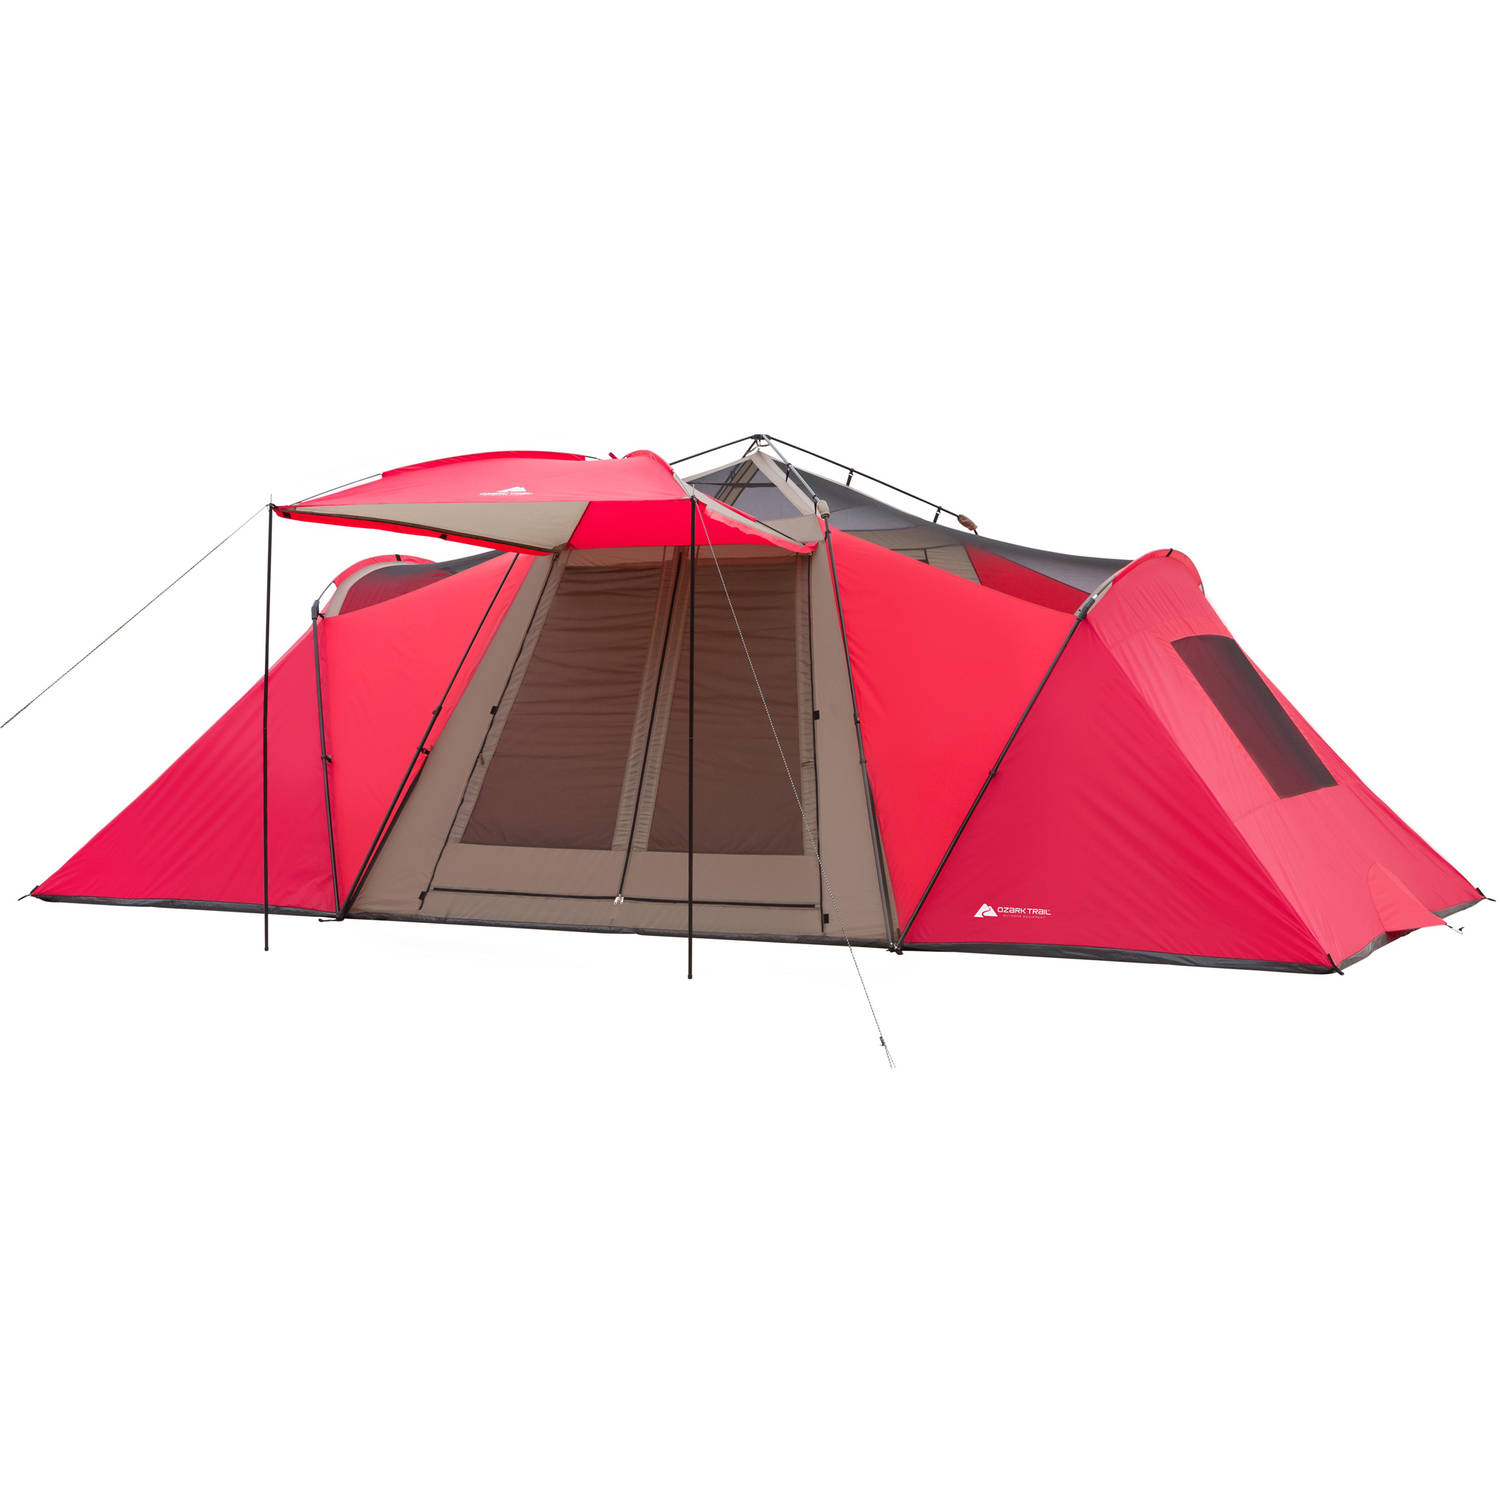 Ozark Trail 21' x 10' 3-Room Instant Tent with Awning, Sleeps 12, Red - image 2 of 11